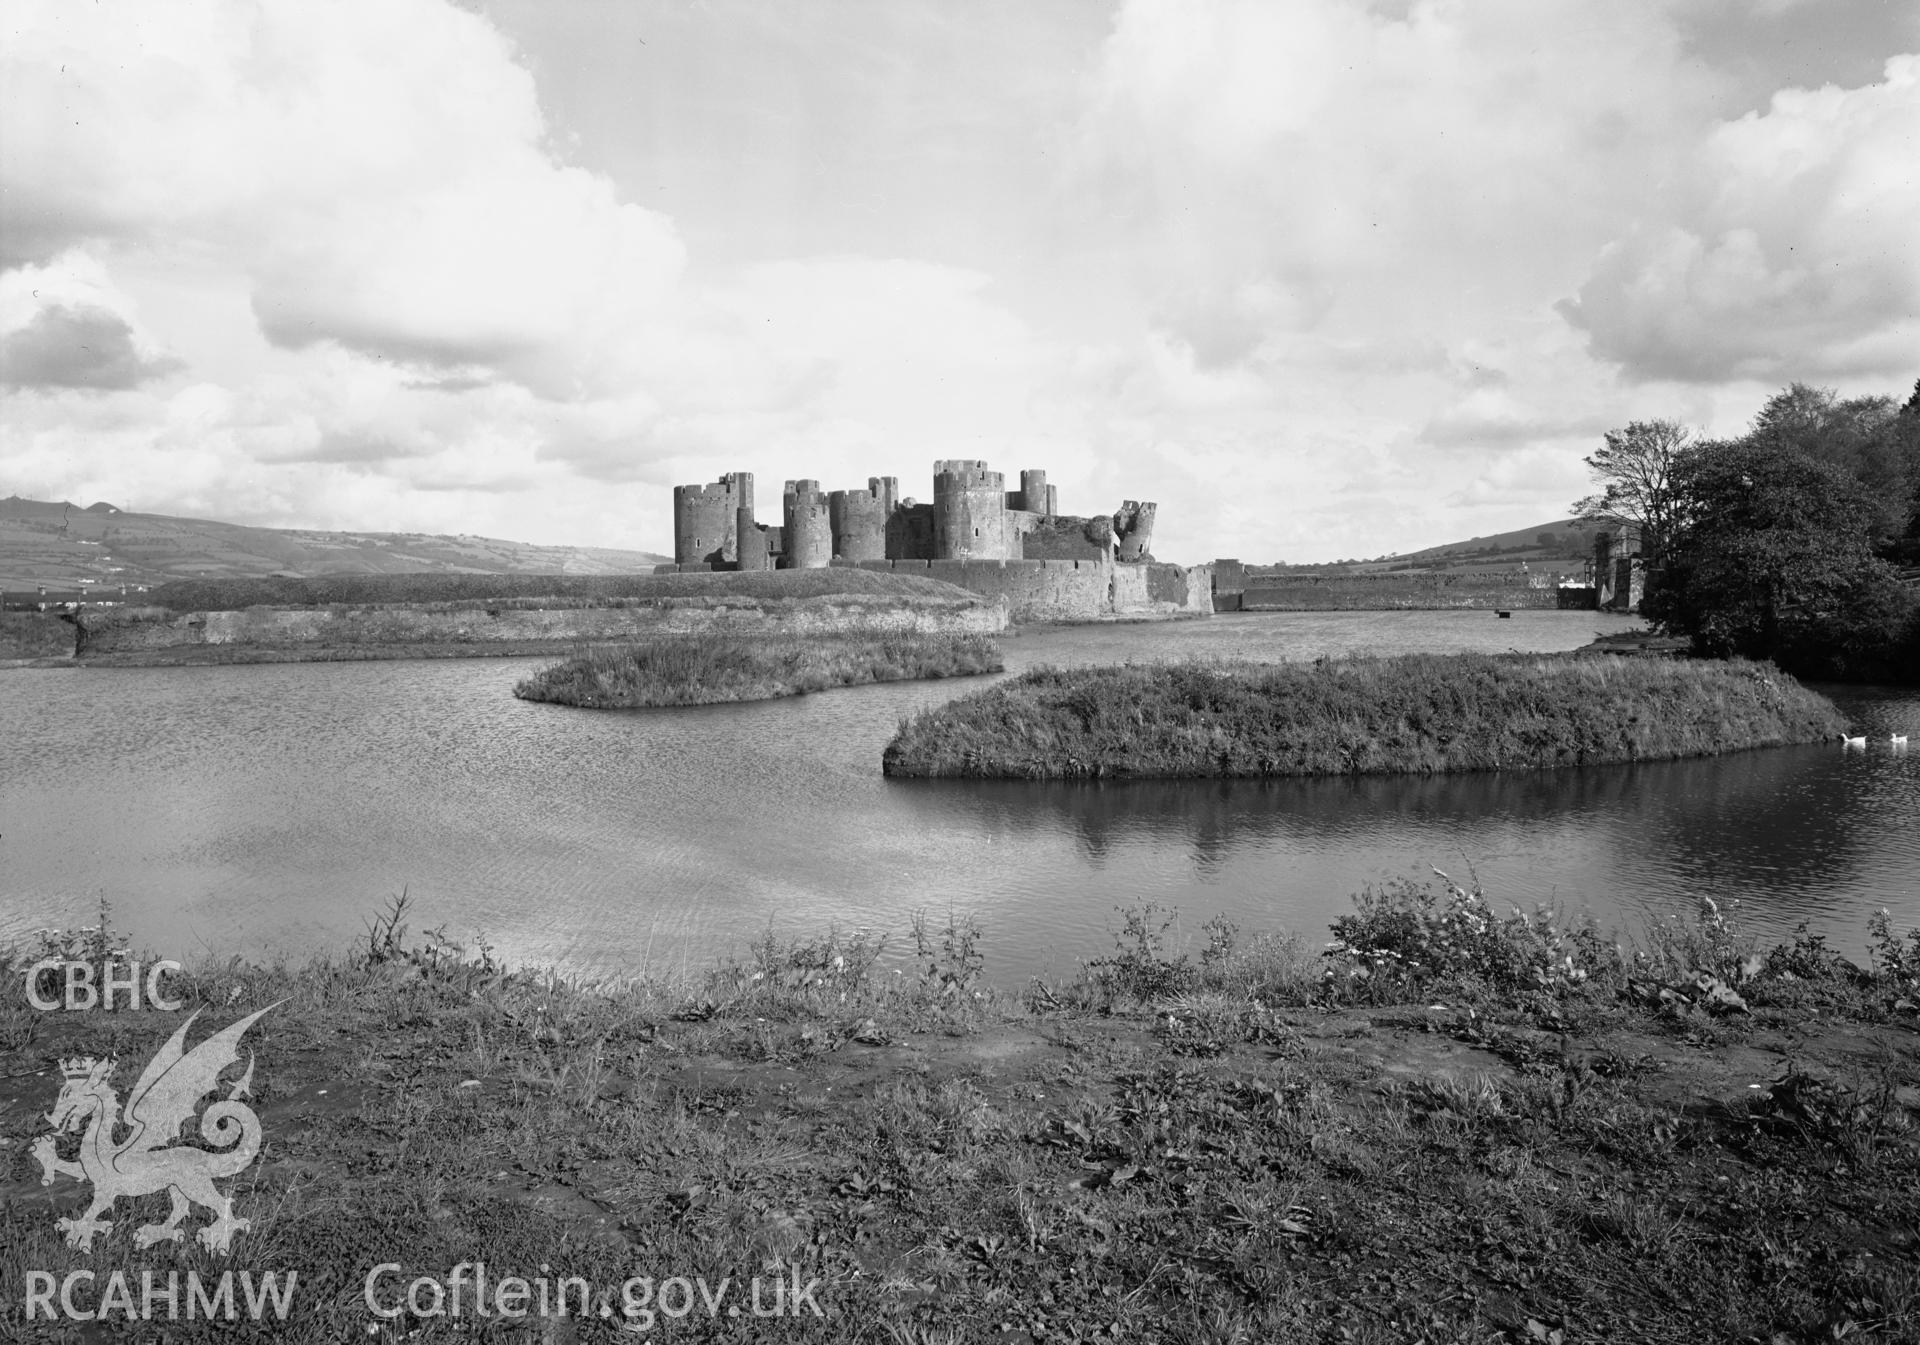 D.O.E photograph of Caerphilly Castle - view from south west showing water defences.